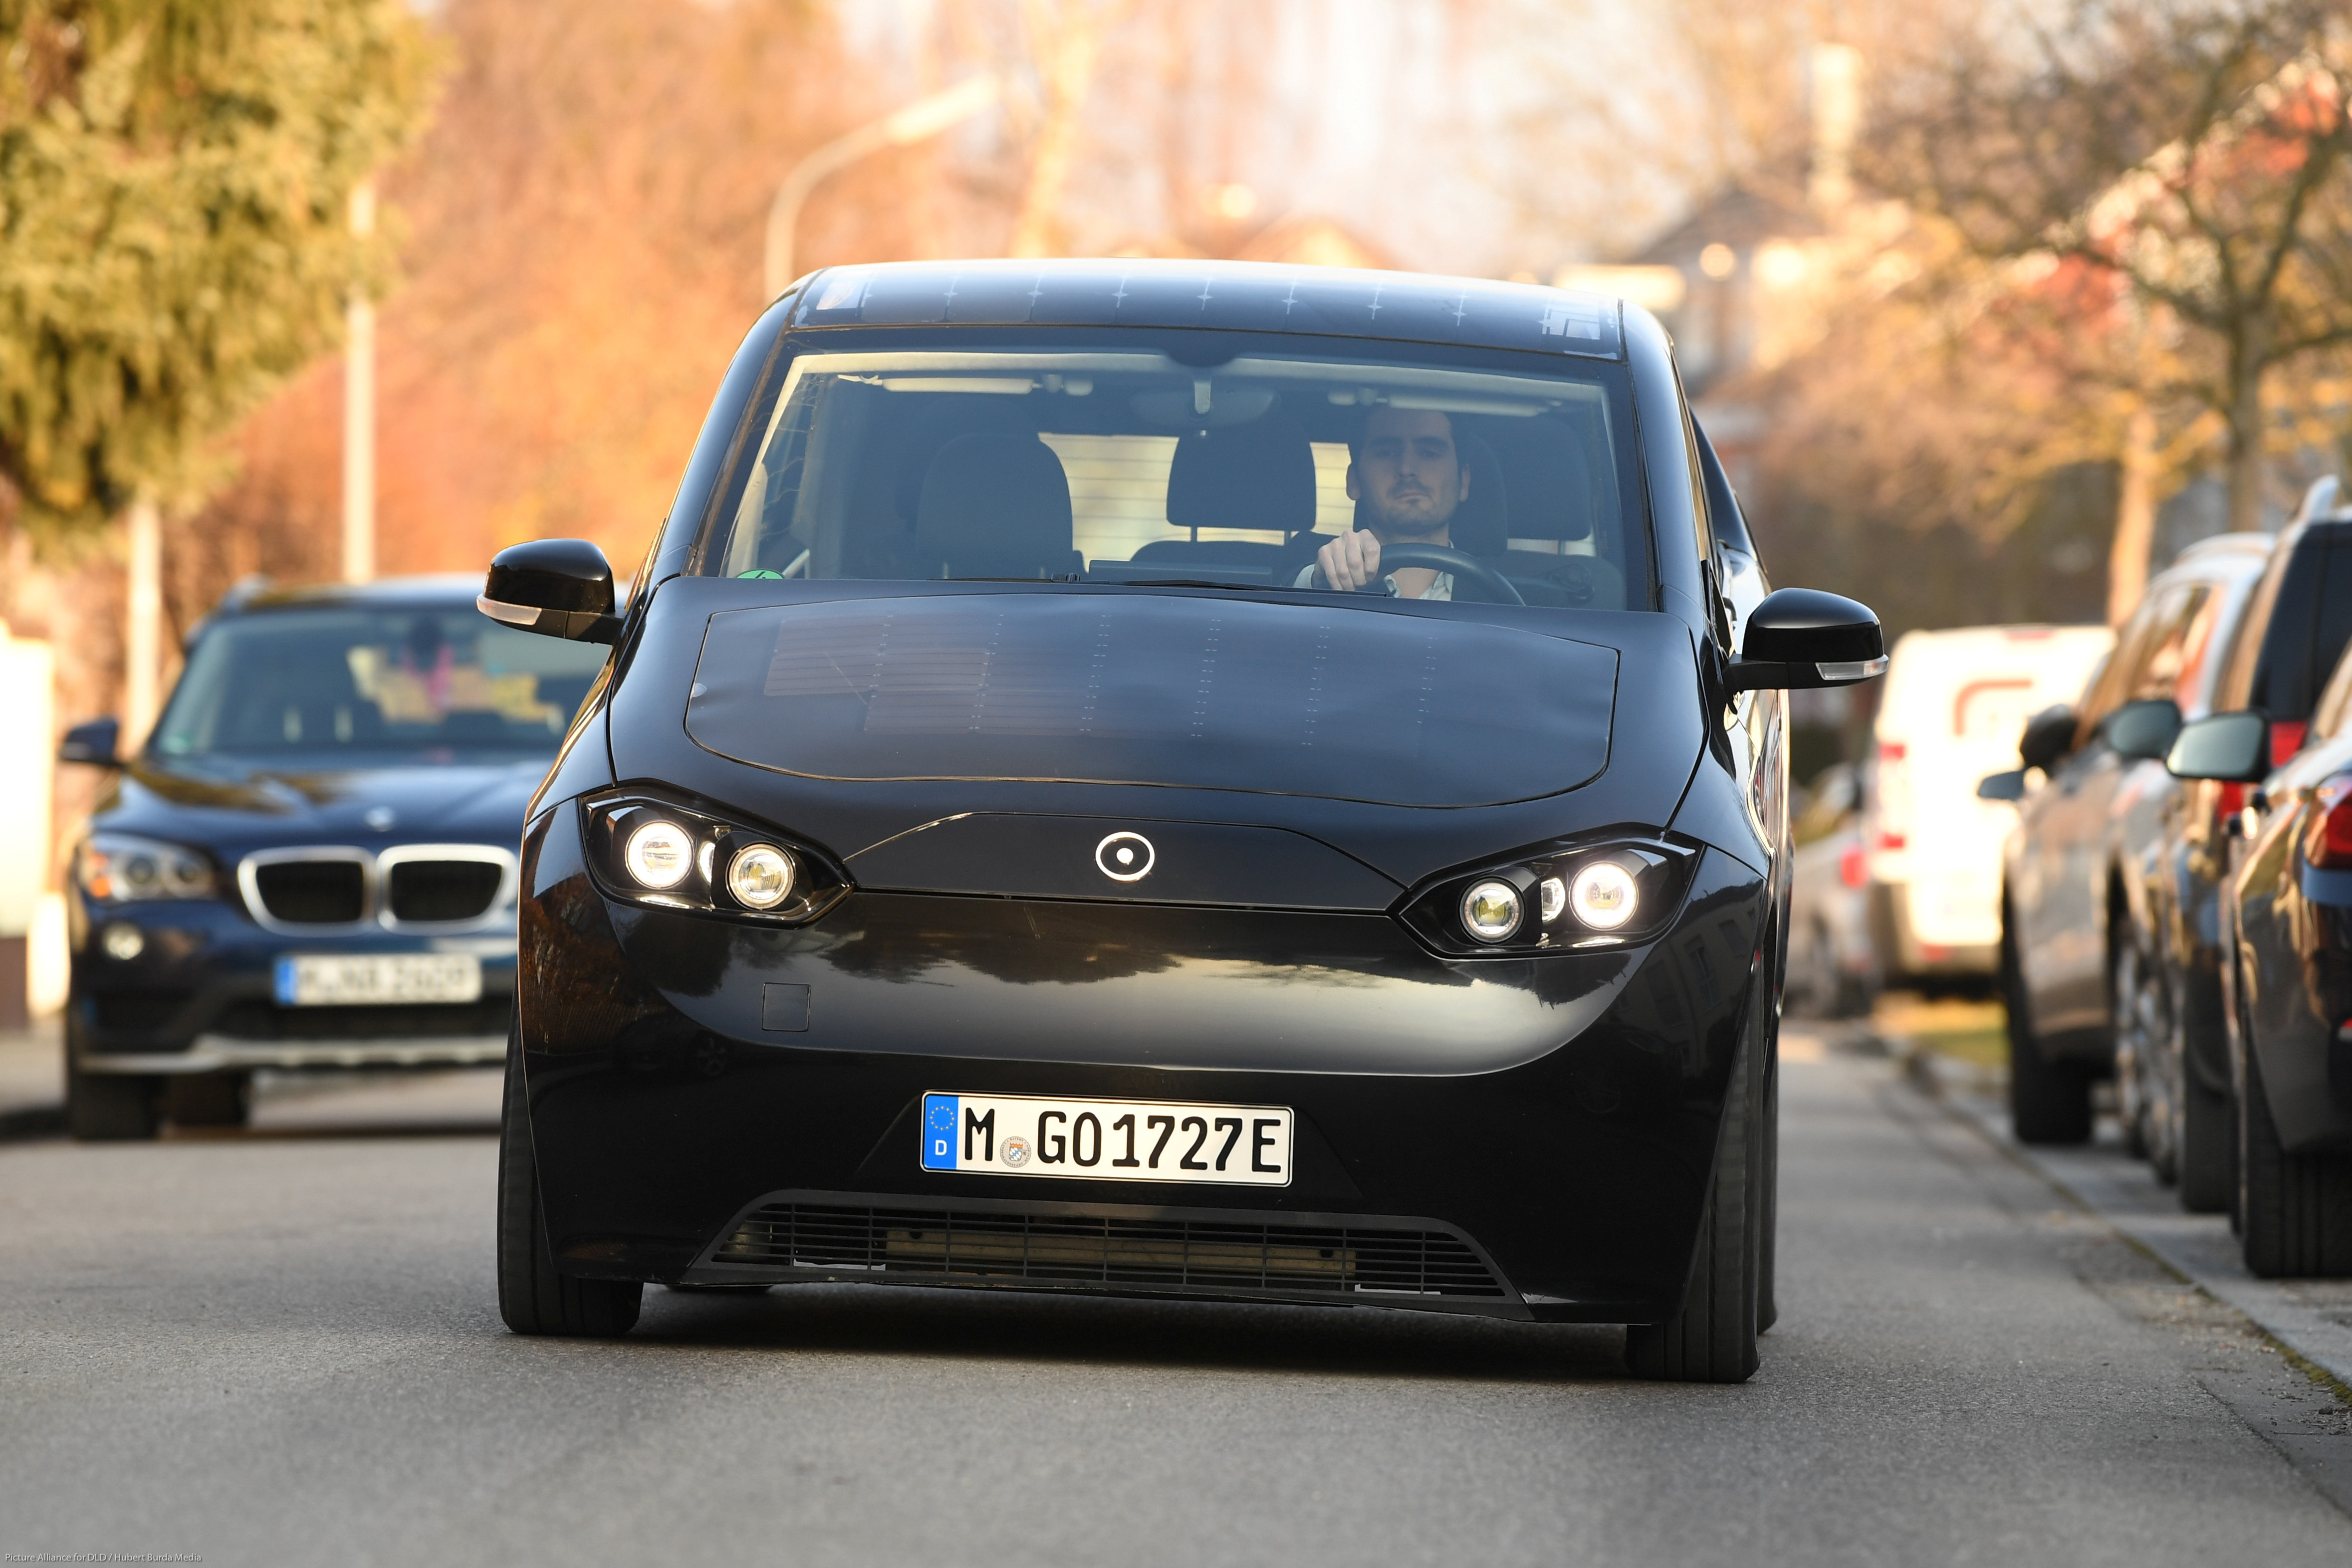 Laurin Hahn, co-founder of German solar-powered electric car startup Sono Motors, drives a prototype of their car in Munich